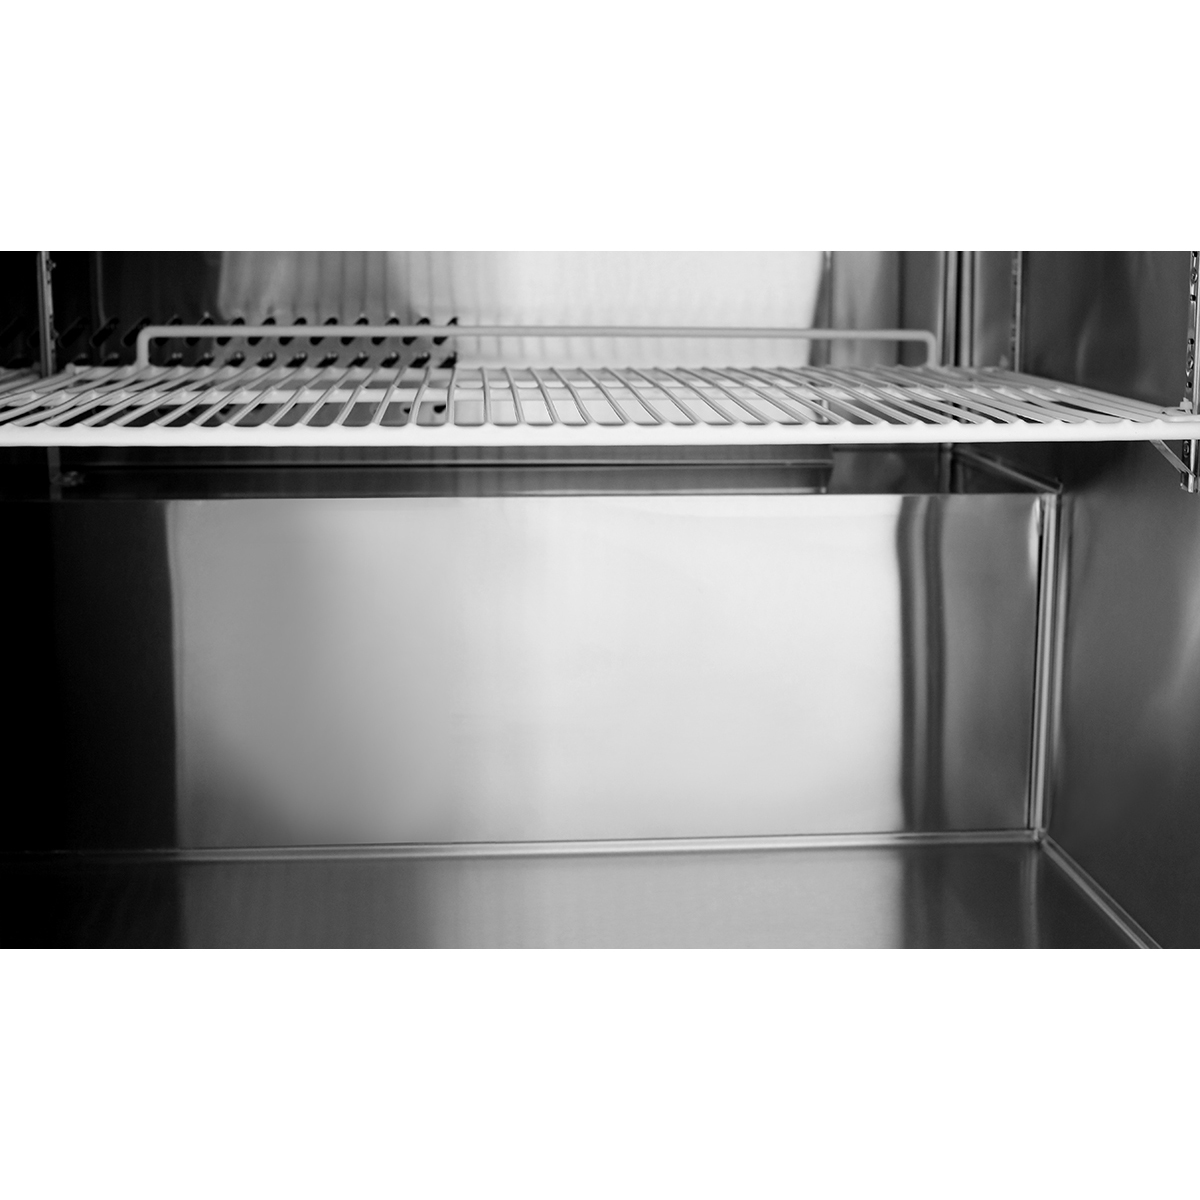 Atosa MGF8406GR Two Section Rear Mount Undercounter Freezer 48-1/4"W x 30"D x 34-1/8"H with 2 Solid Doors image 1